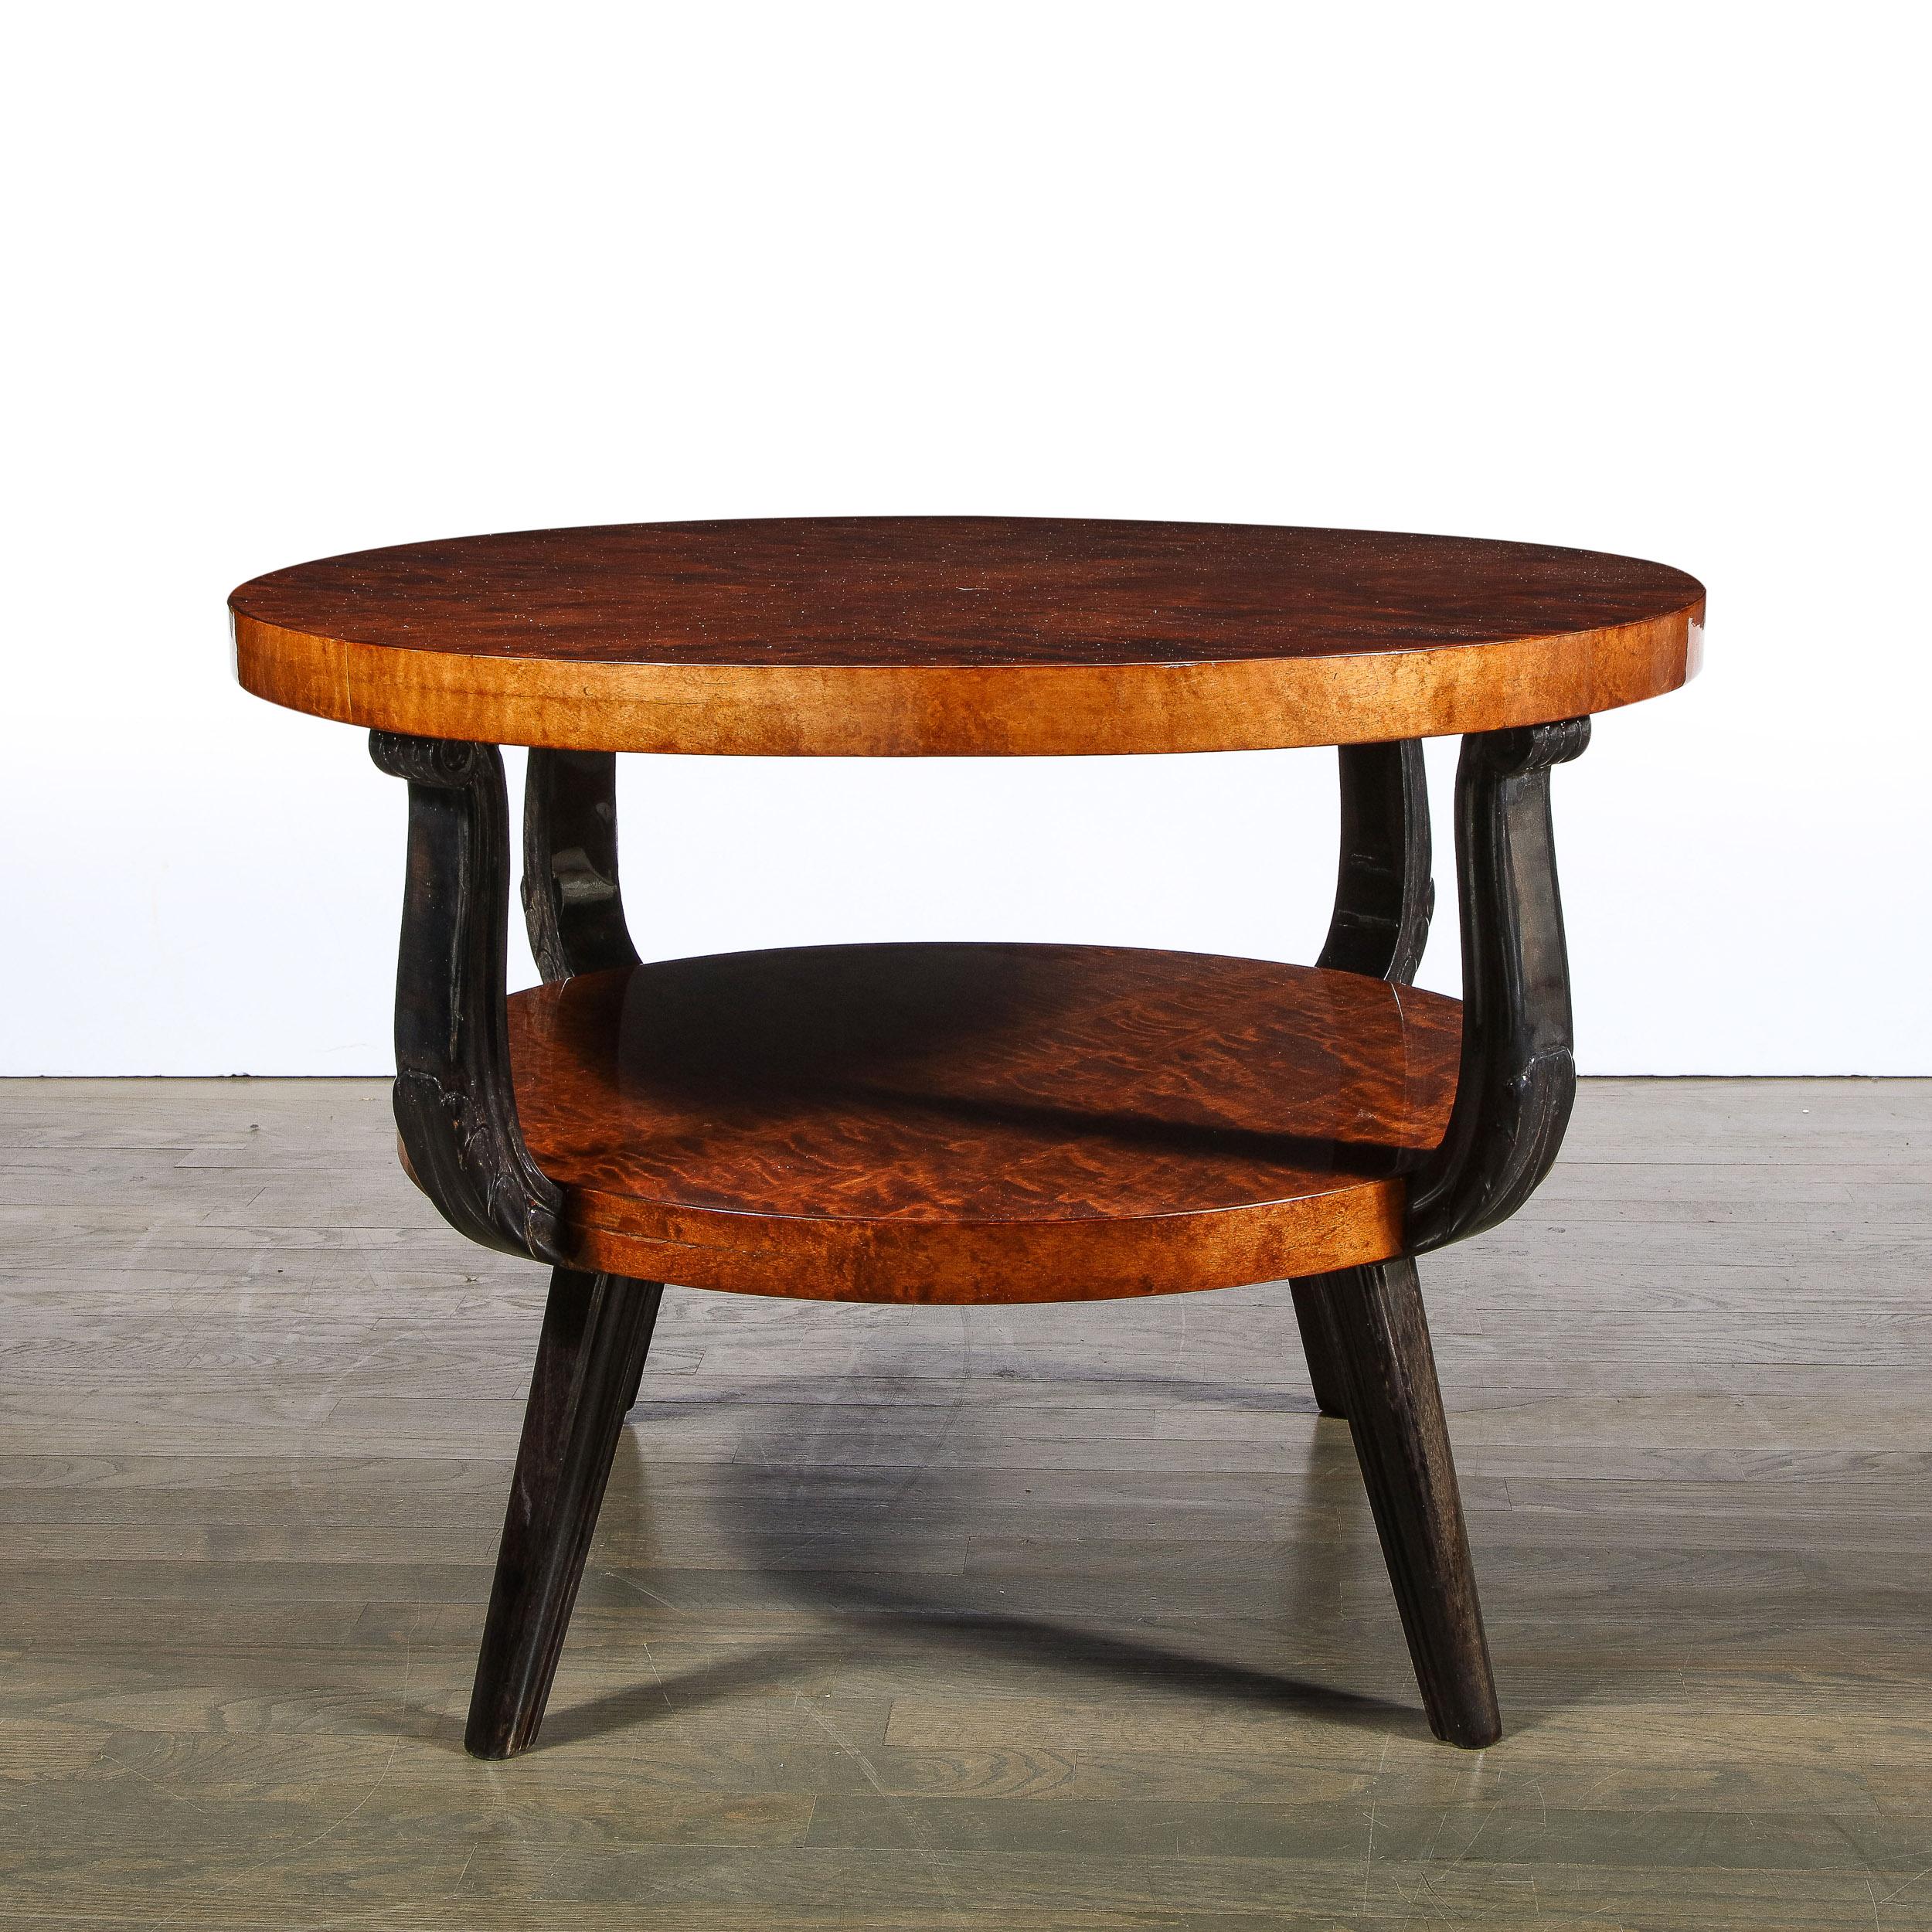 This elegant two tier Art Deco table was realized in France circa 1930. It features two circular tiers in beautiful burled acacia with splayed black lacquer legs and streamlined scroll form supports connecting the tiers. With its beautiful quality